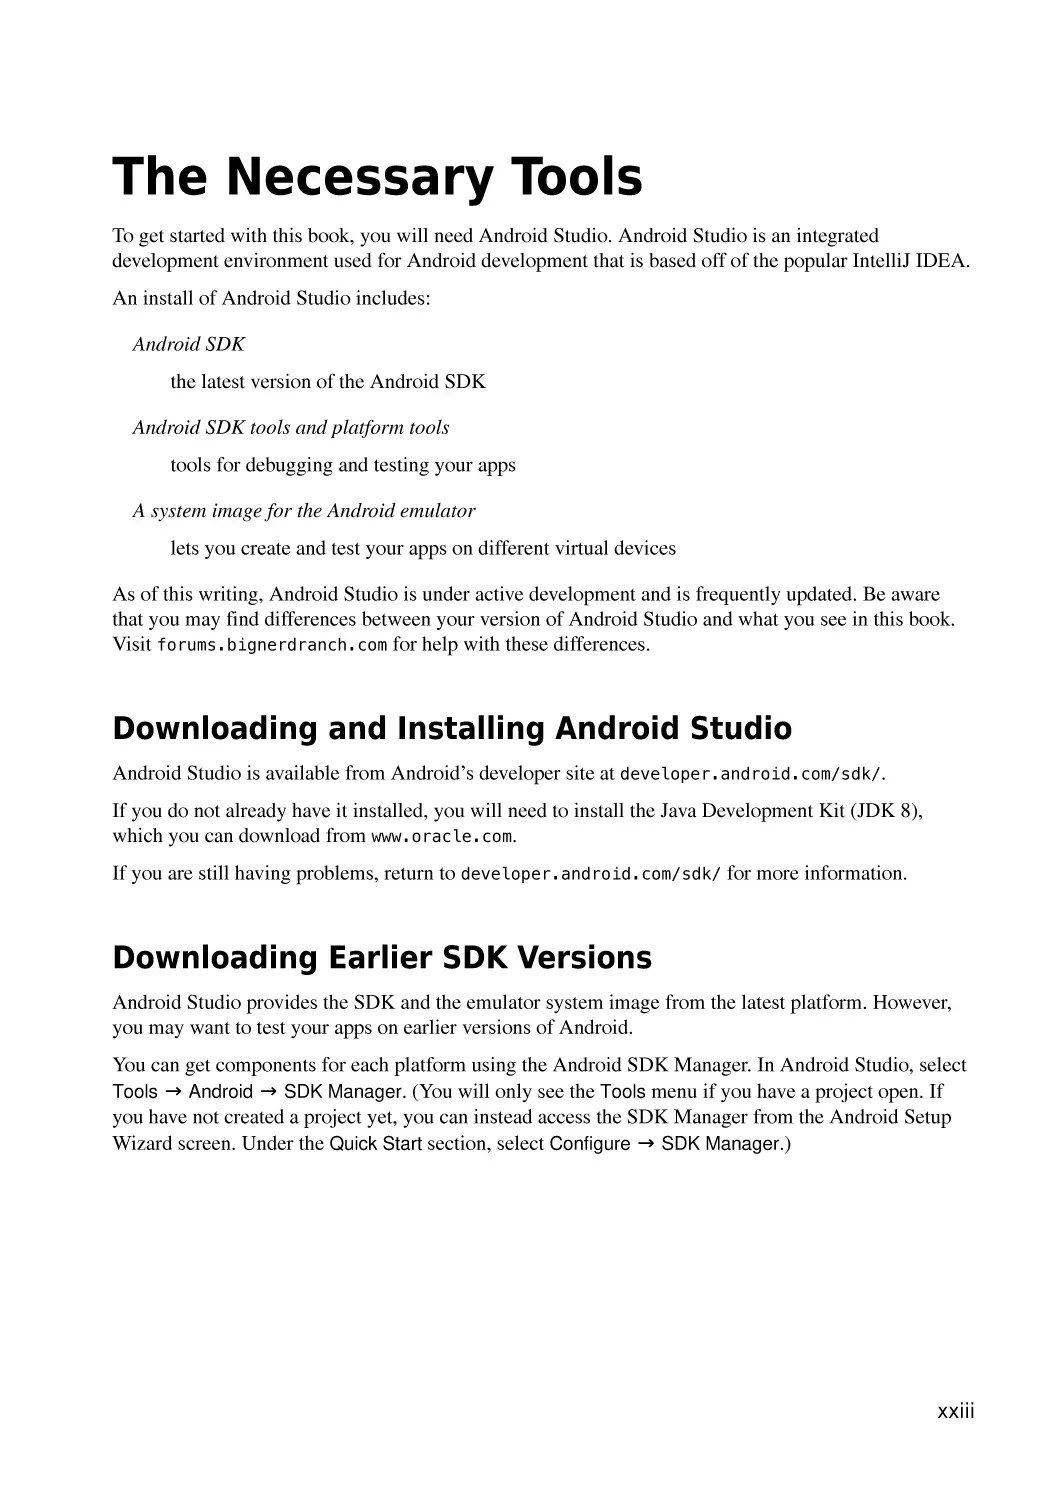 The Necessary Tools
Downloading and Installing Android Studio
Downloading Earlier SDK Versions